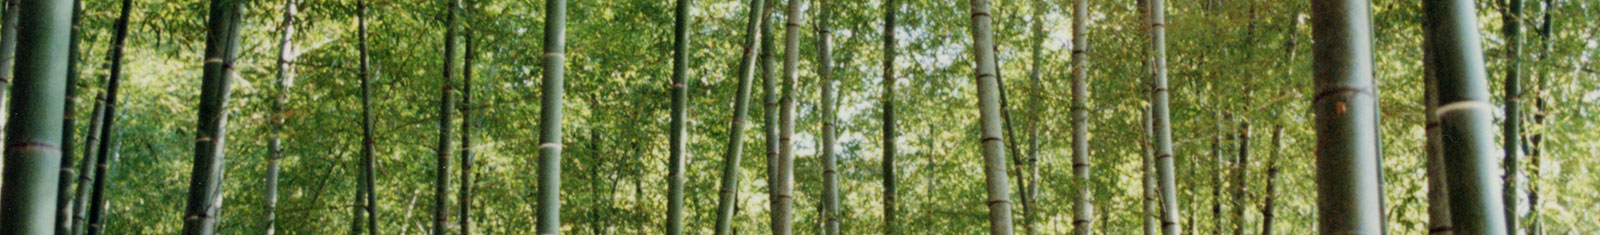 About Bamboo Image